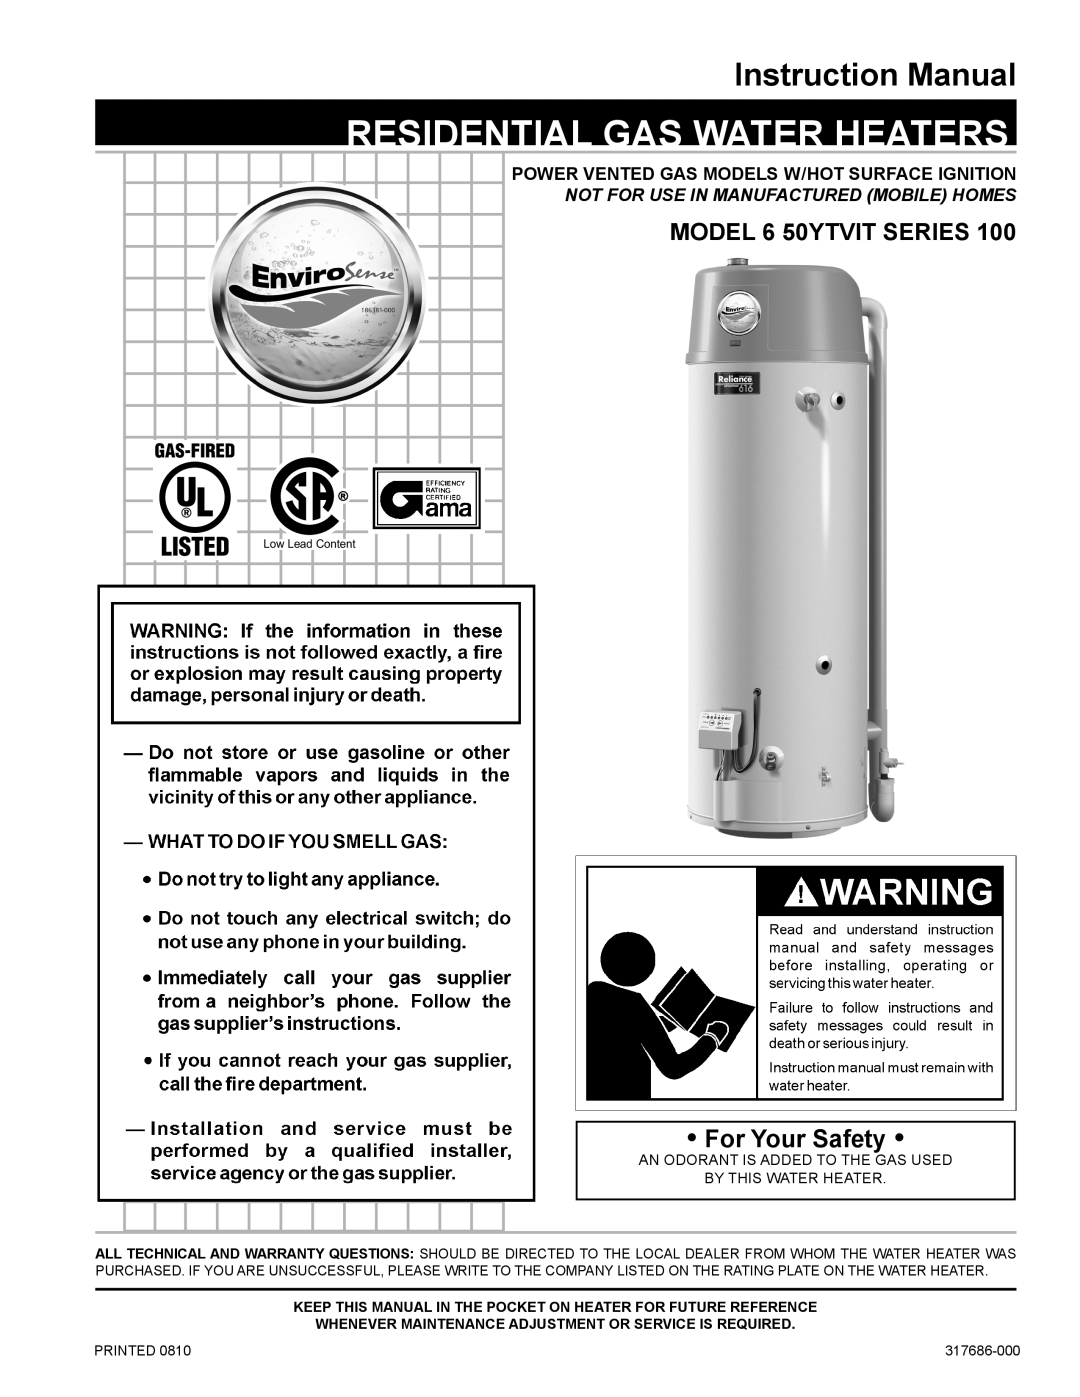 Reliance Water Heaters 317686-000 instruction manual For Your Safety, Residential Gas Water Heaters, Instruction Manual 